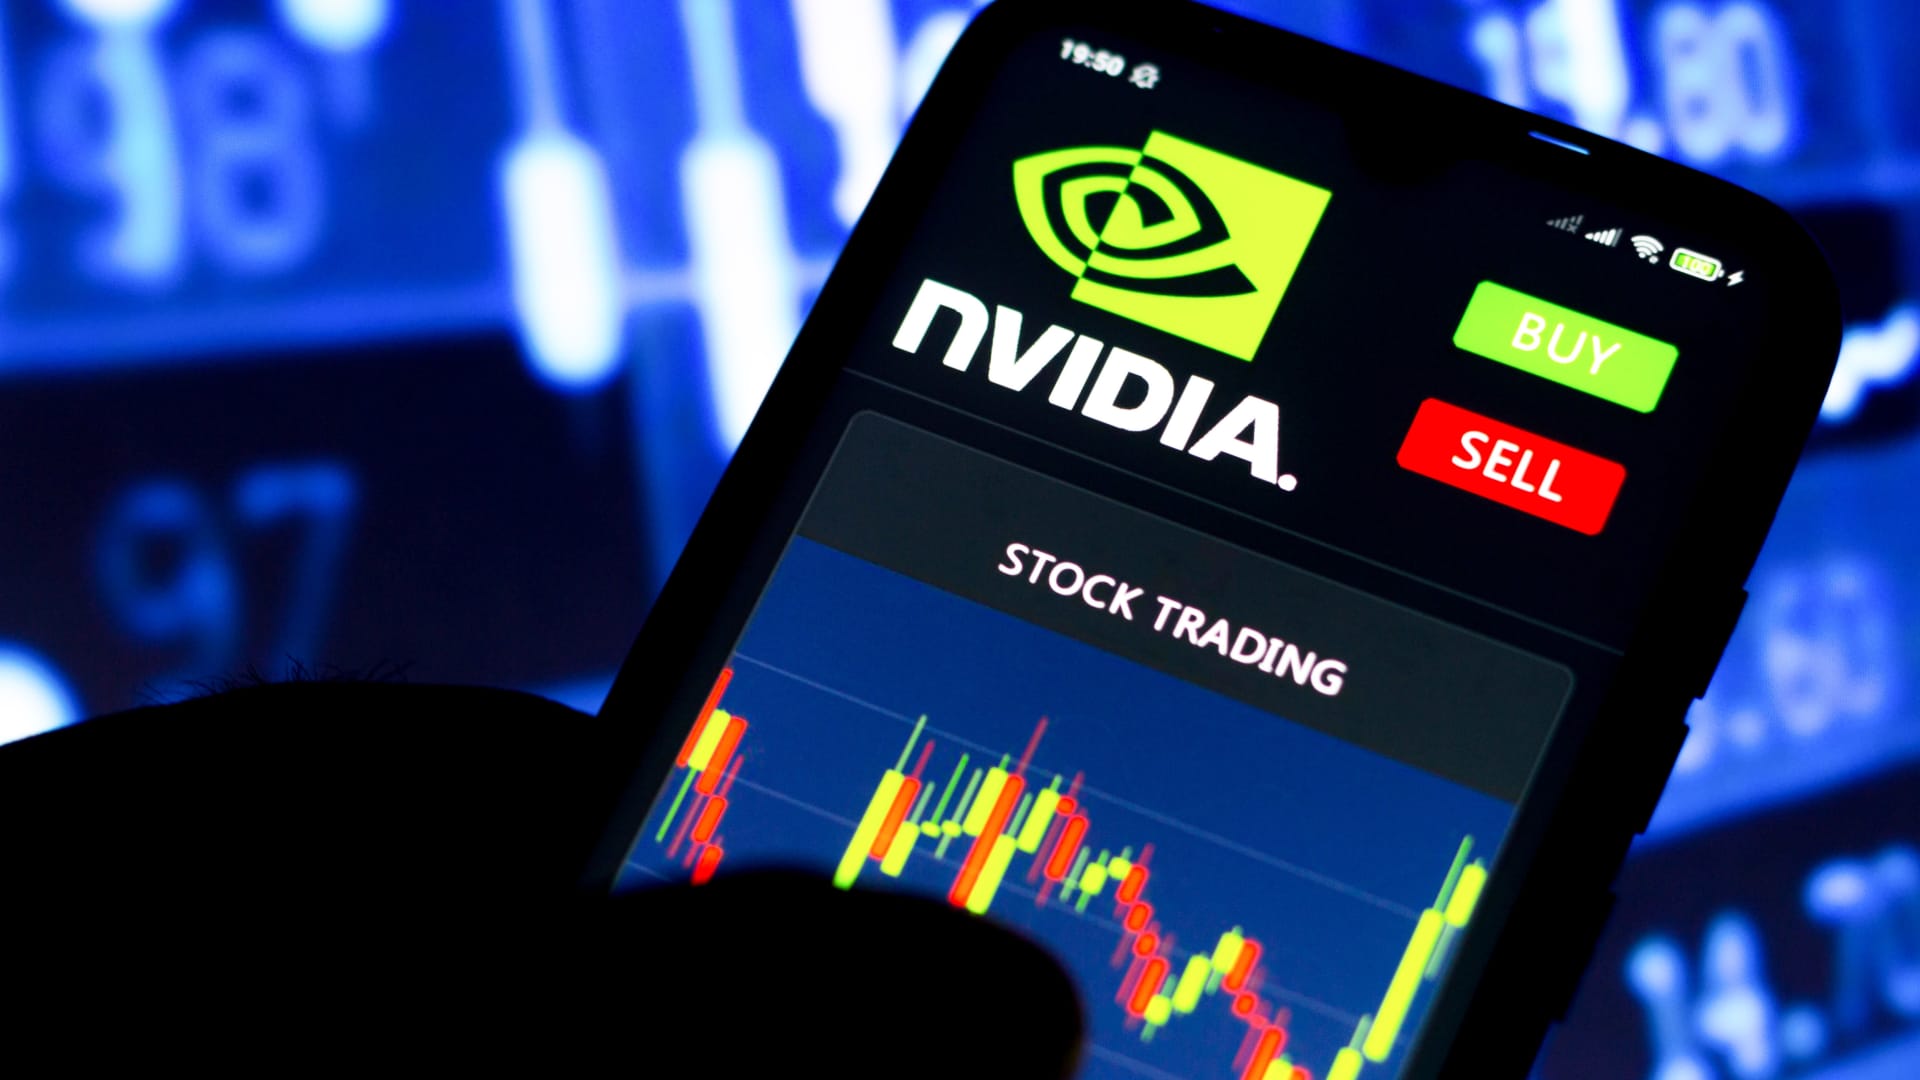 Nvidia is the ‘AI buy,’ says ‘Fast Money’ trader Tim Seymour